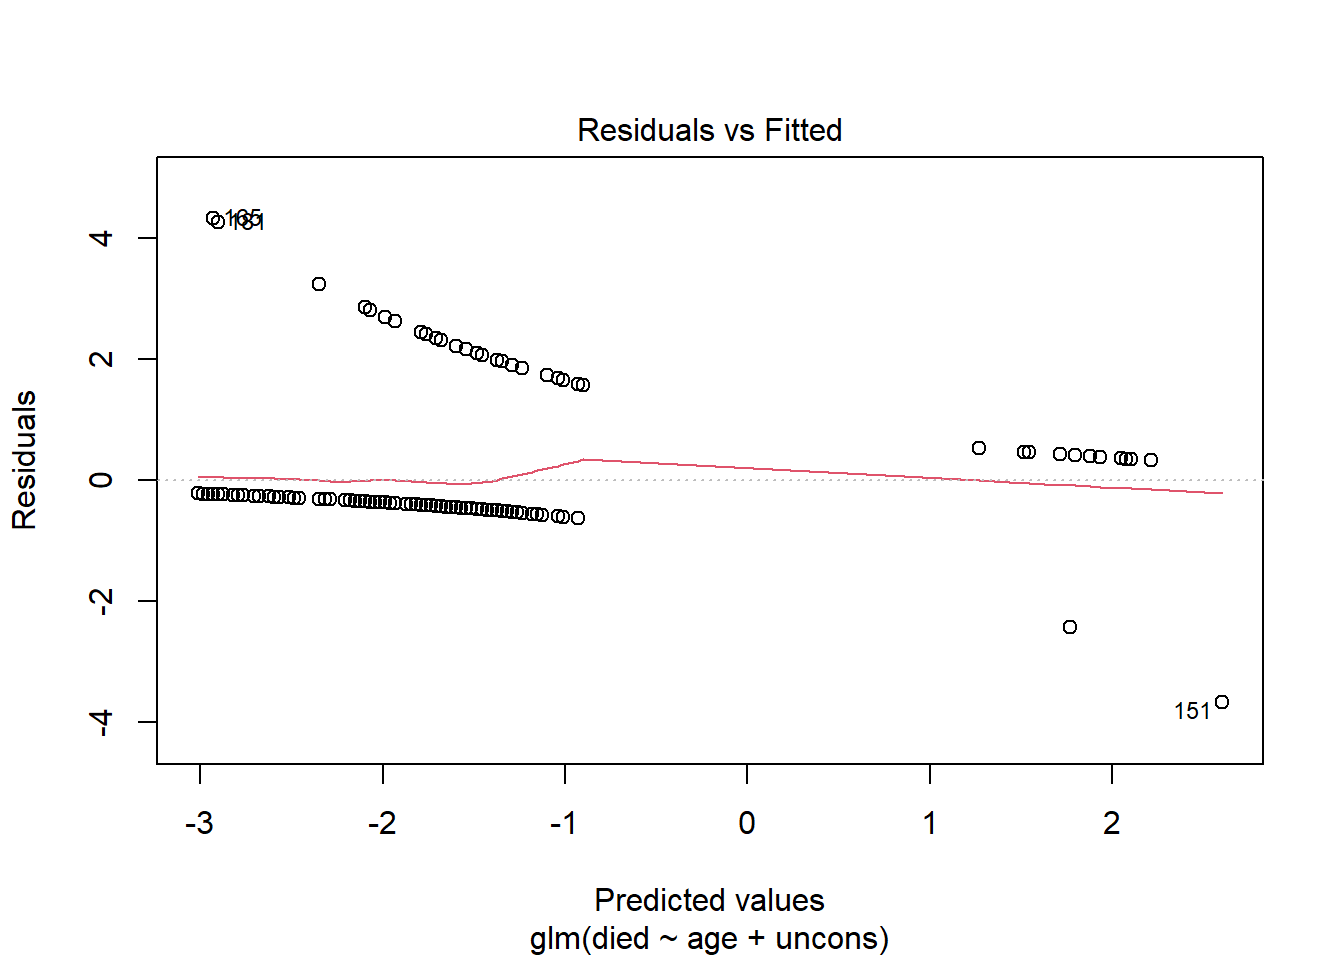 One residuals versus fitted plot